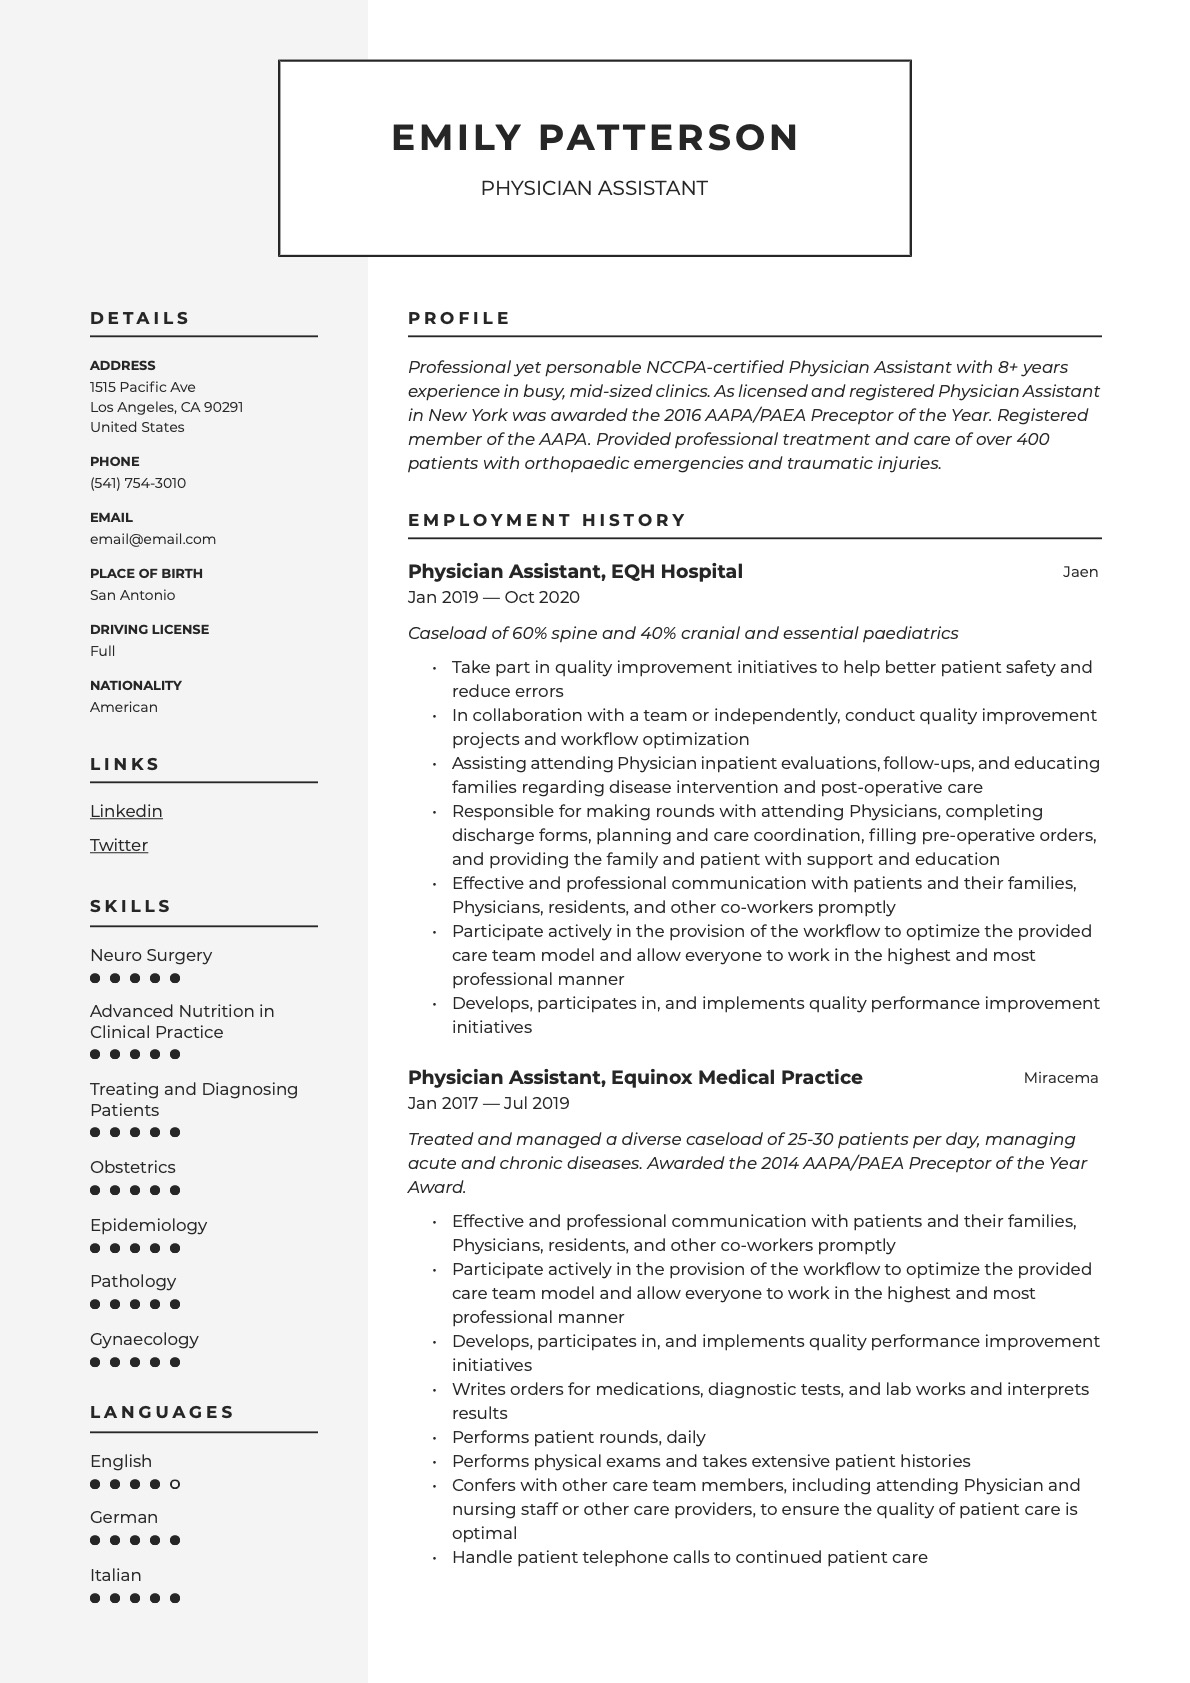 Example Resume Physician Assistant-8